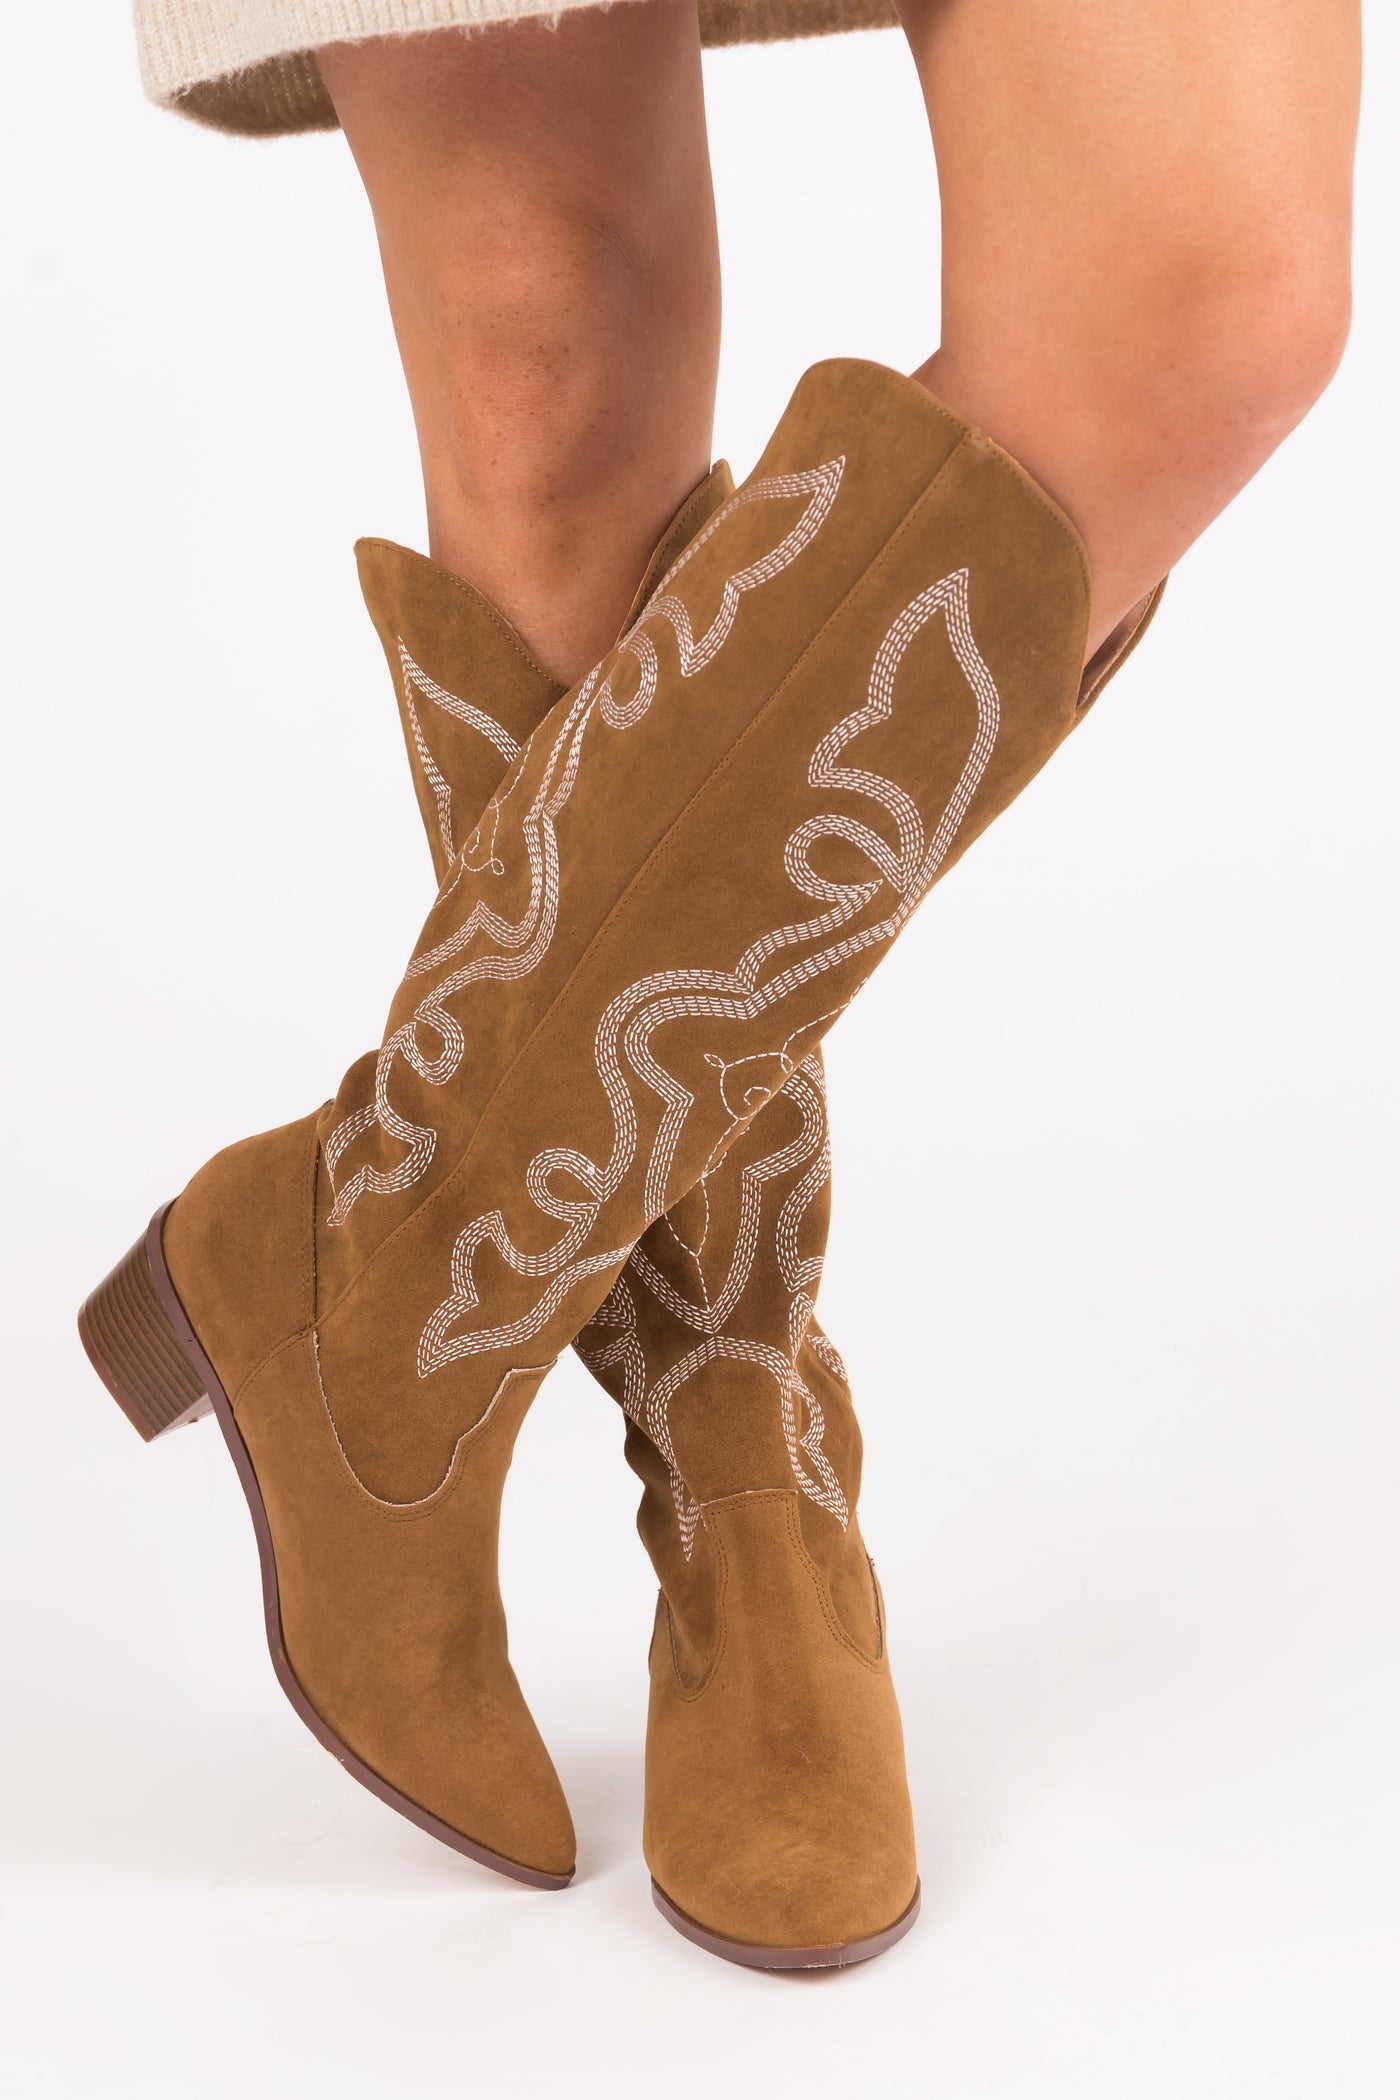 Sepia Pointed Toe Knee High Western Boots